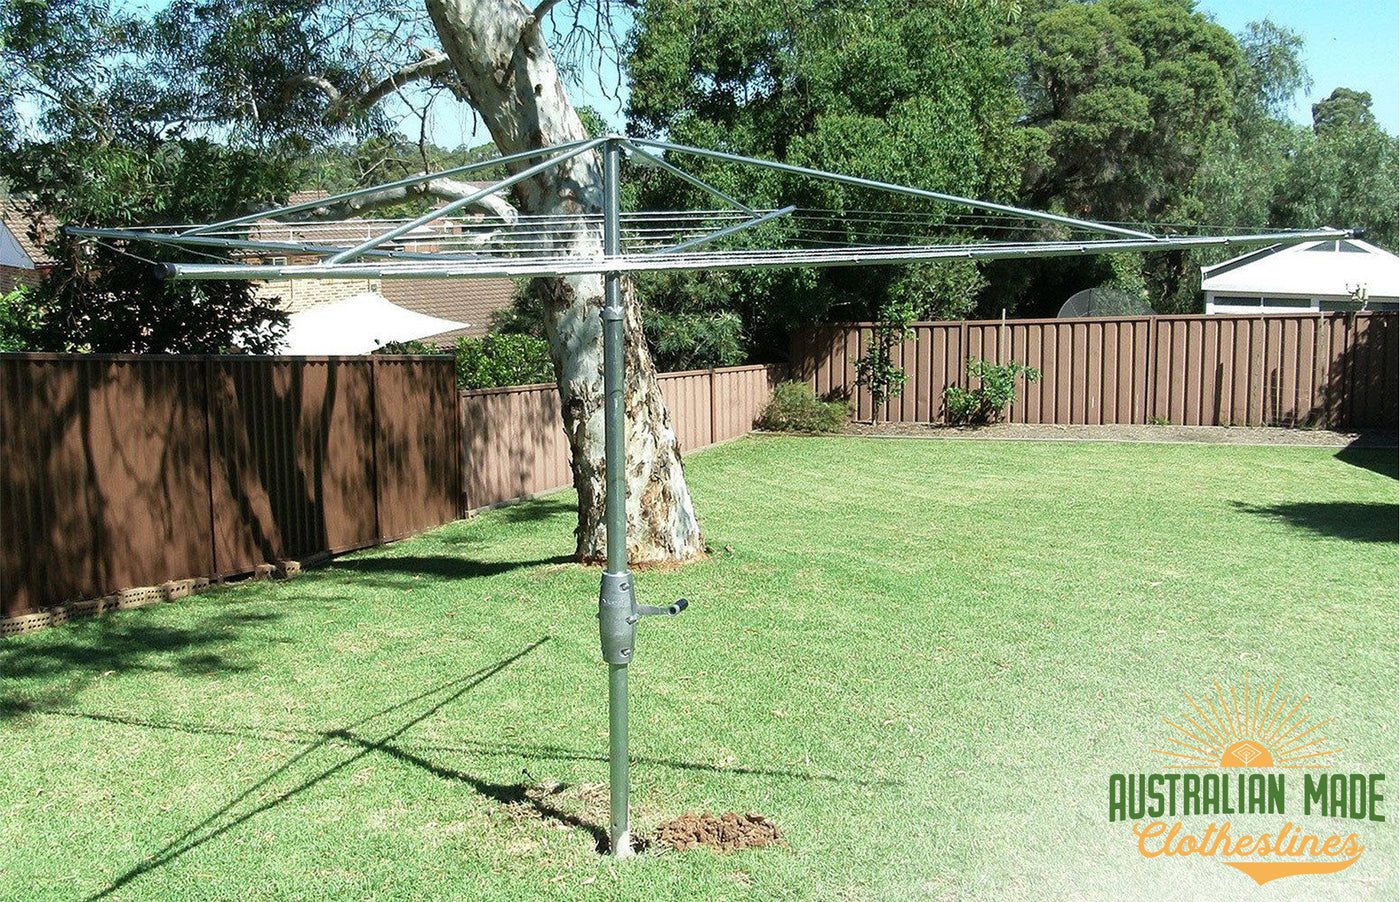 Austral Super 4 Clothes Hoist - Ground Mounted - Australian Made Clotheslines